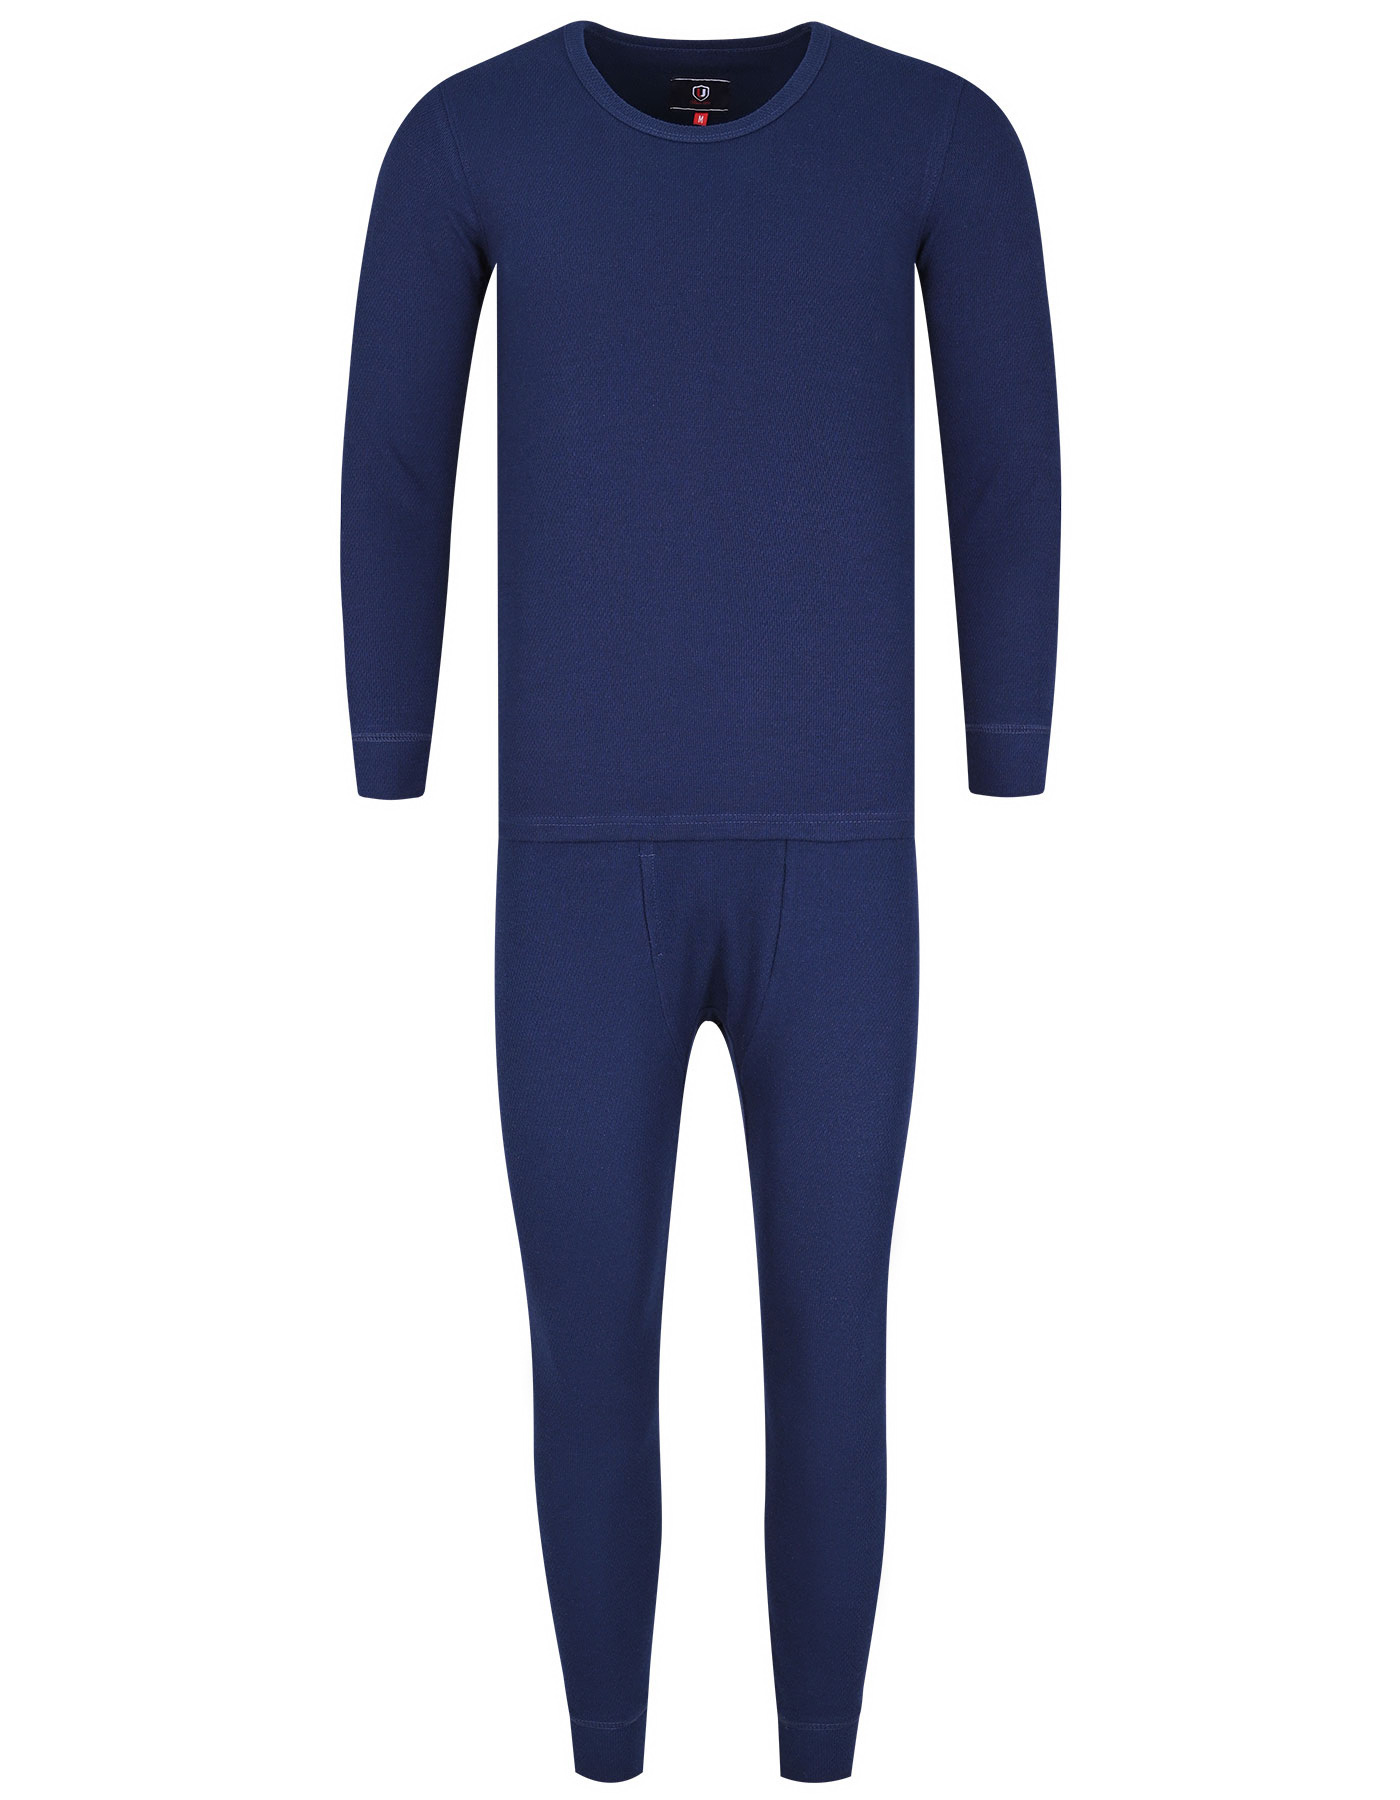 Thermal Suit Online shopping in Pakistan